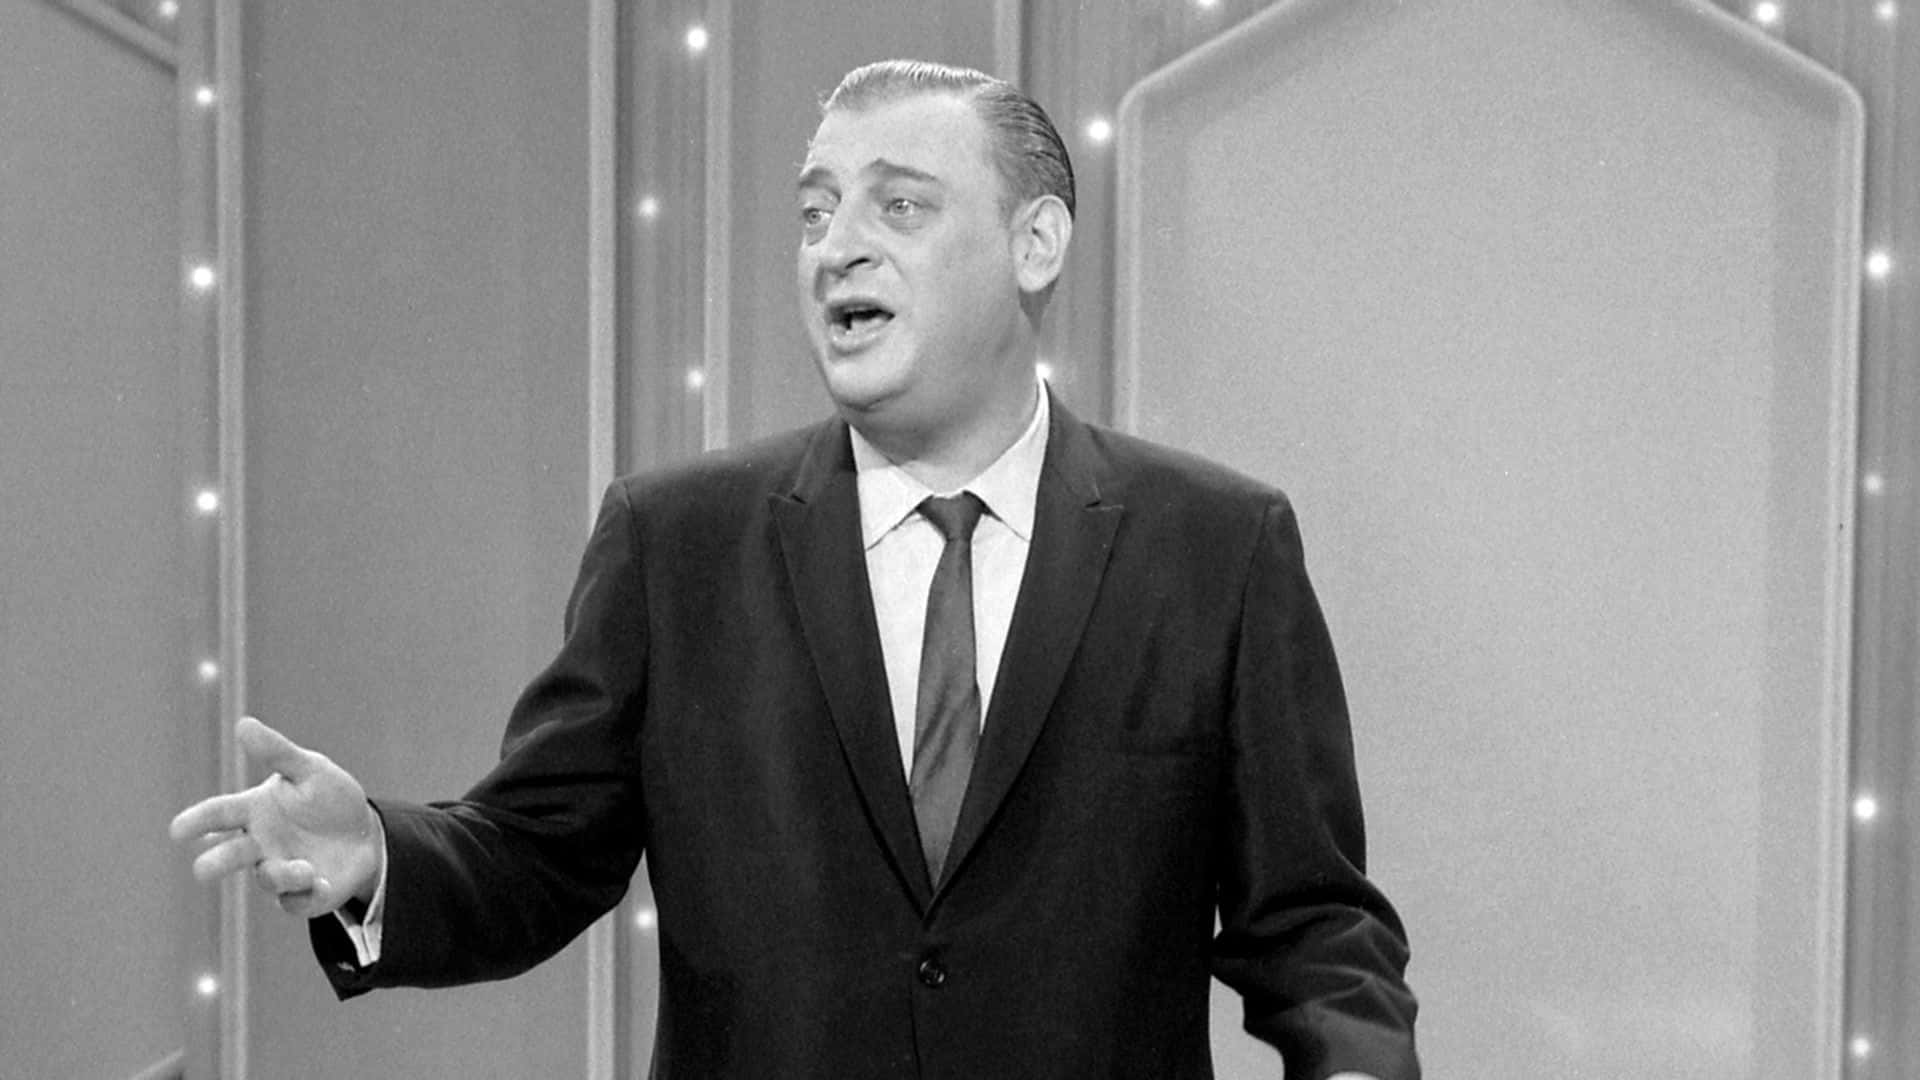 Rodney Dangerfield Gracing the Stage in Quintessential Monochrome Wallpaper